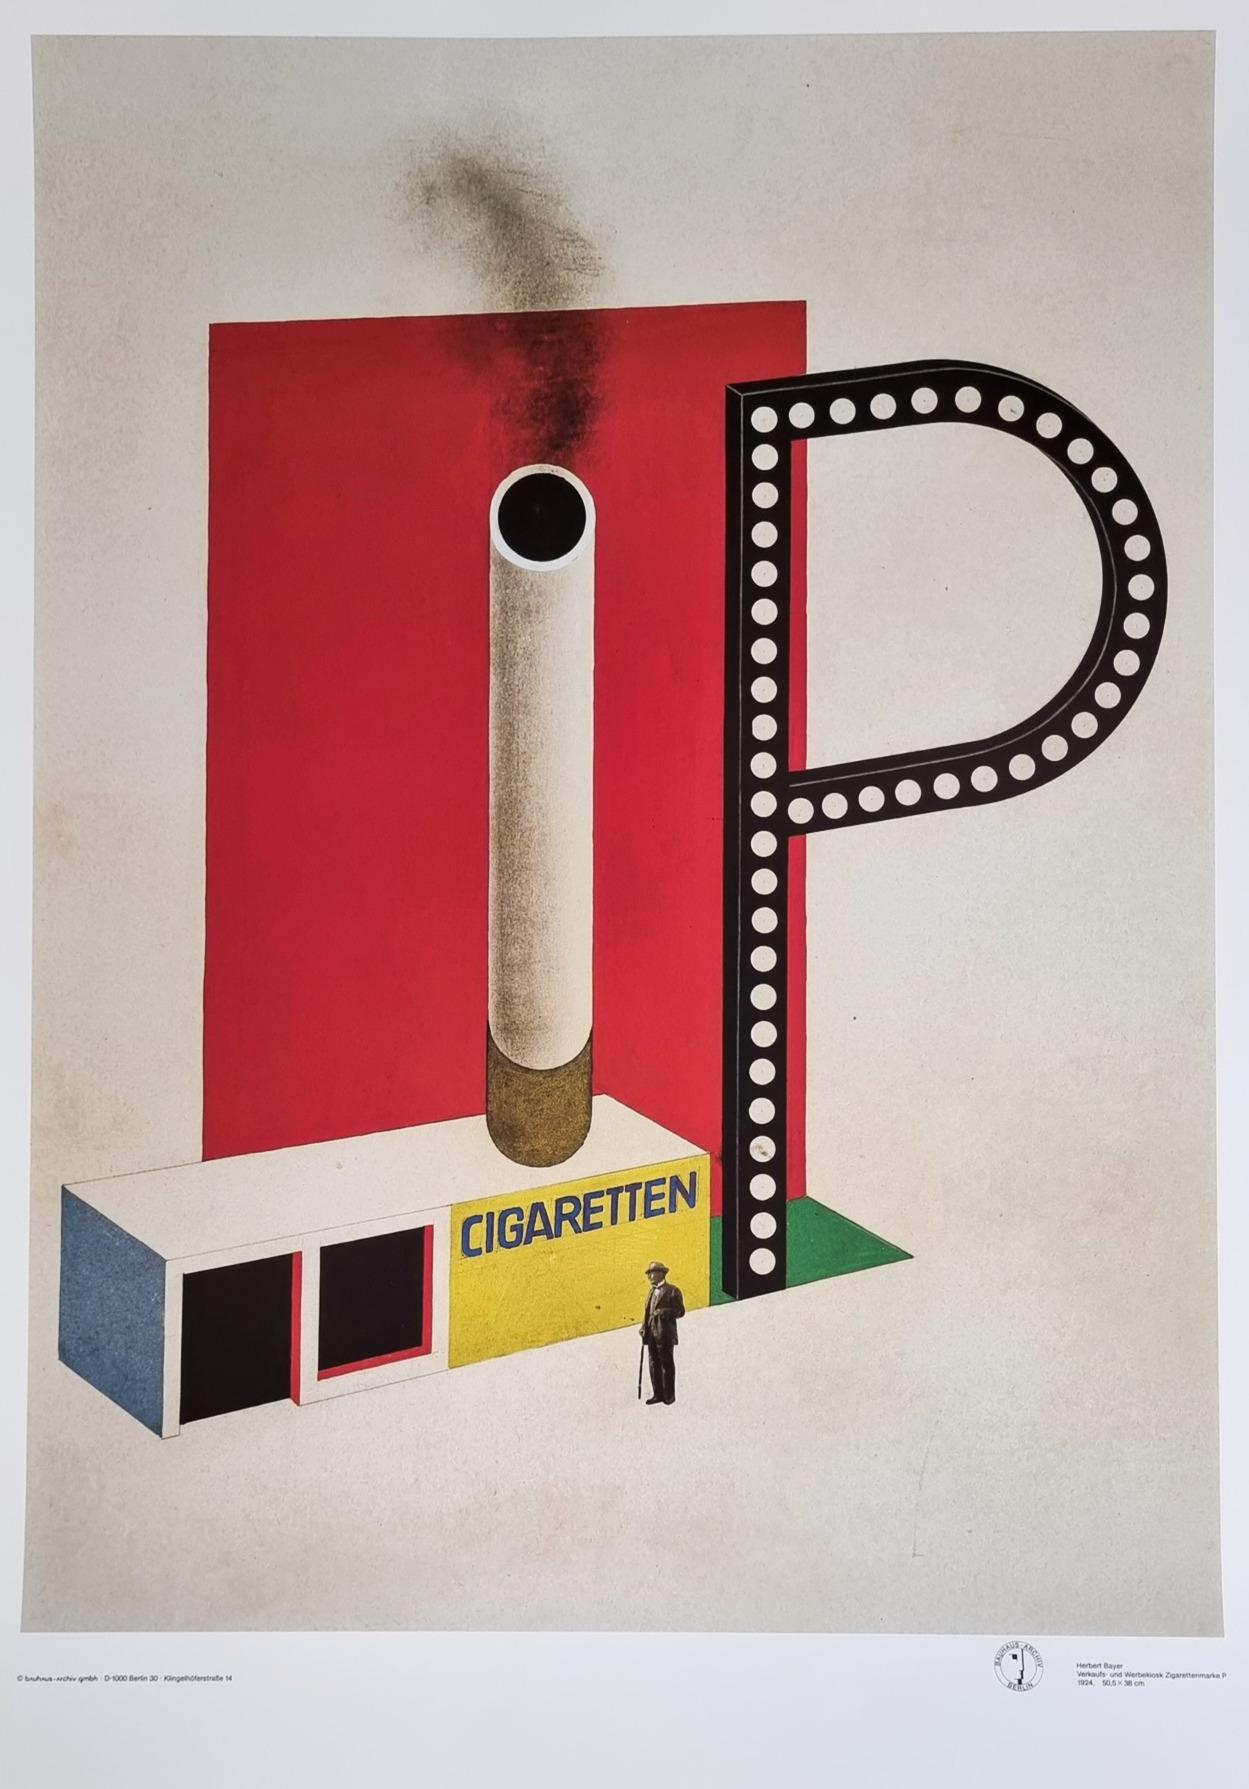 Sale and Marketing Kiosk for P Cigarettes (Bauhaus)  (20% OFF + Free Shipping) - Print by Herbert Bayer